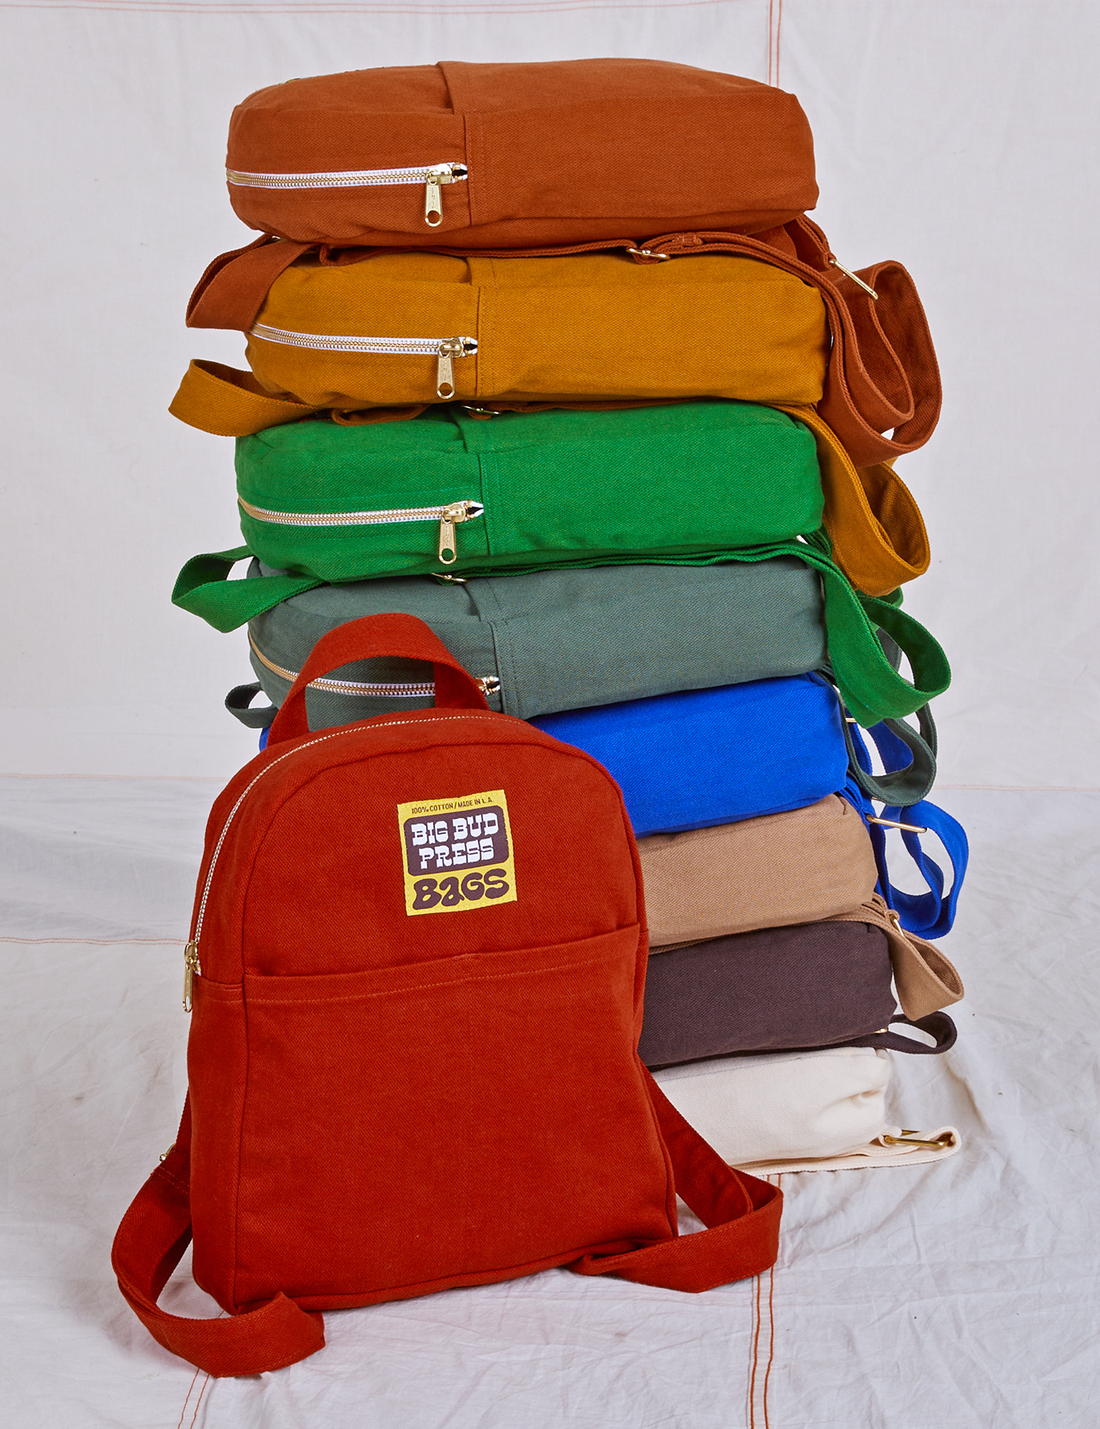 Mini Backpacks in an array of colors